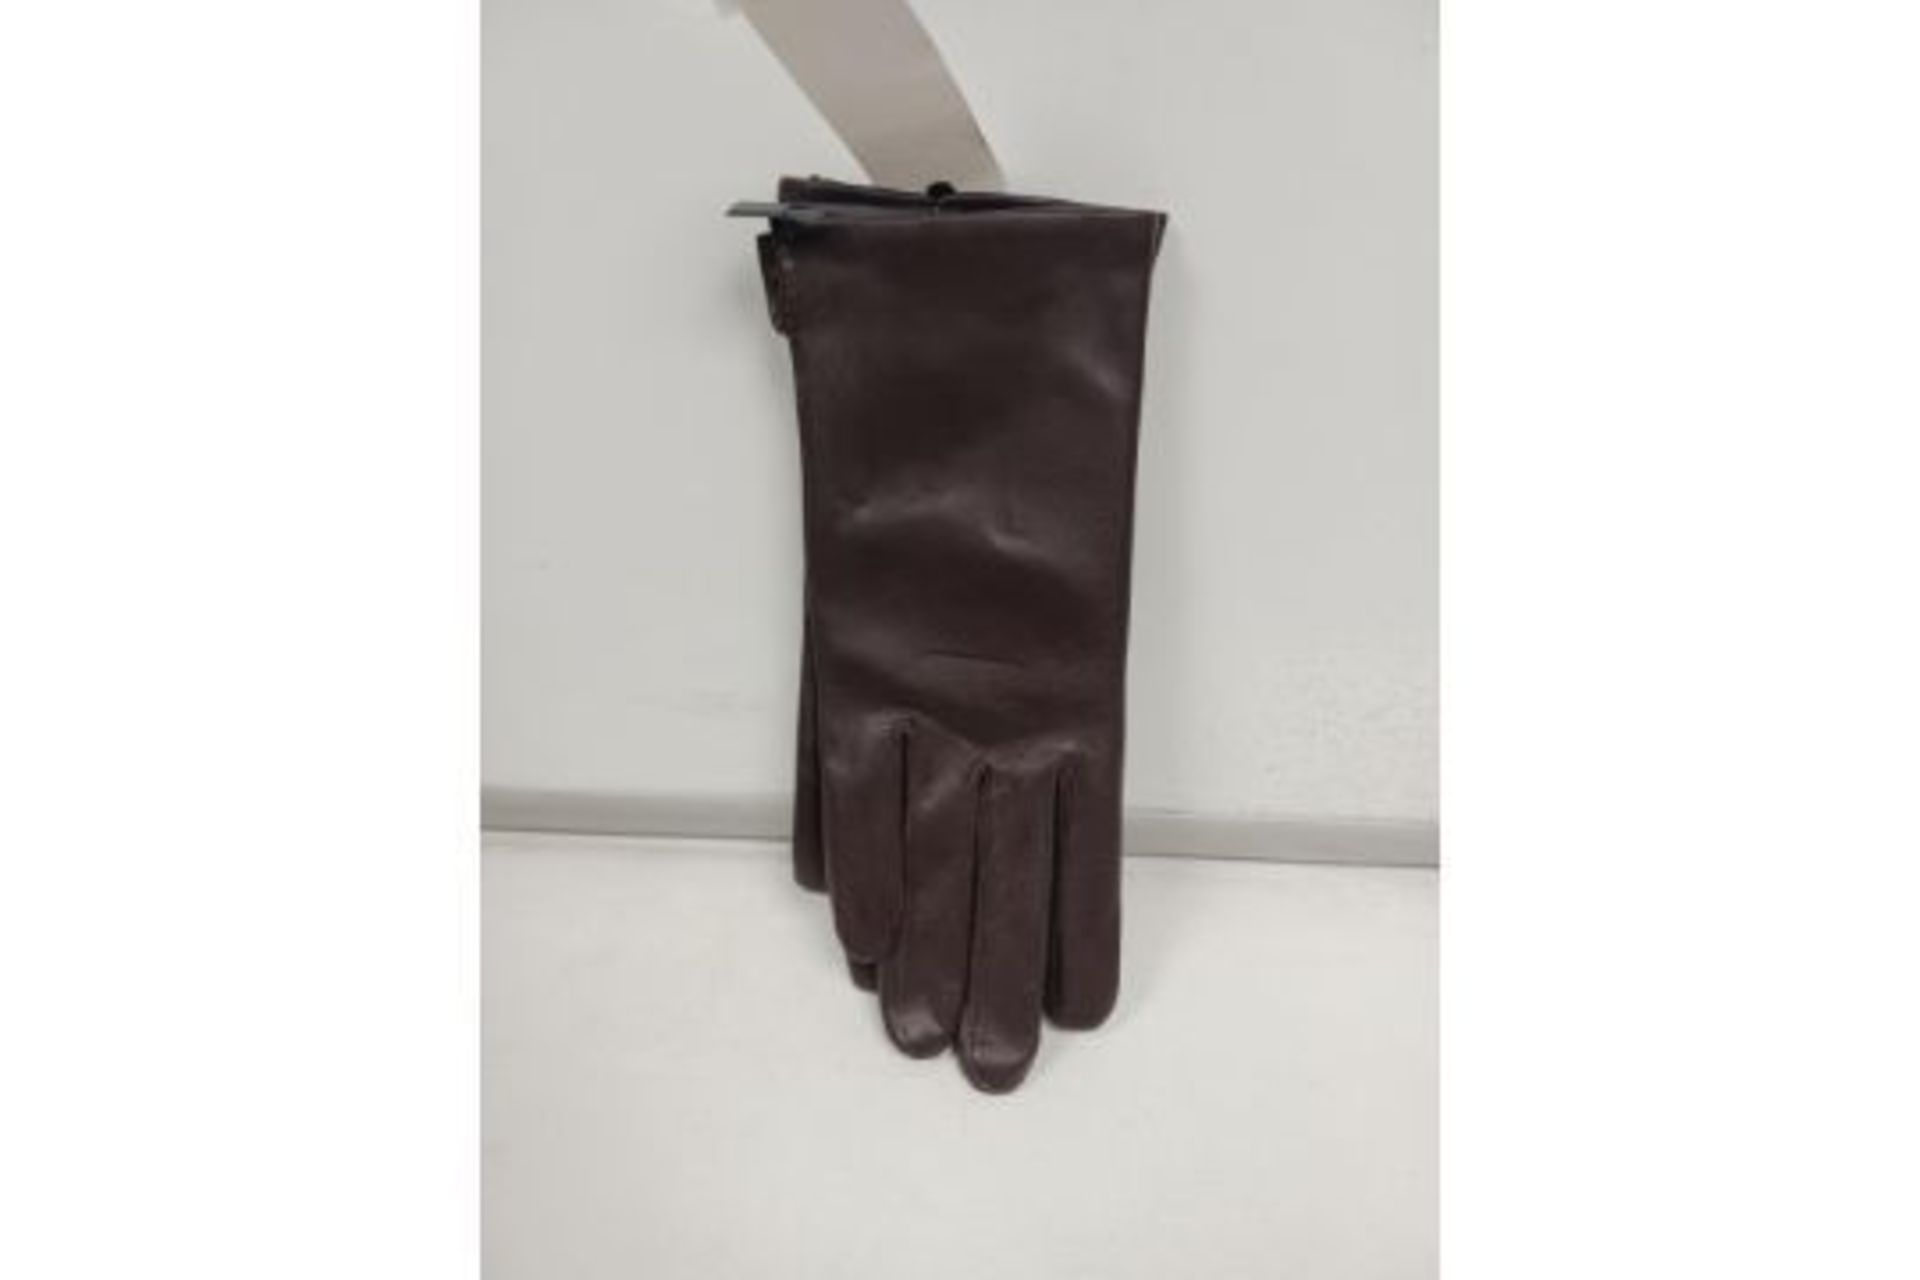 10 X NEW PACKAGED PAIRS OF TOTES ISOTONER LEATHER GLOVES - CHOCOLATE. PRICE MARKED AT £20 PER